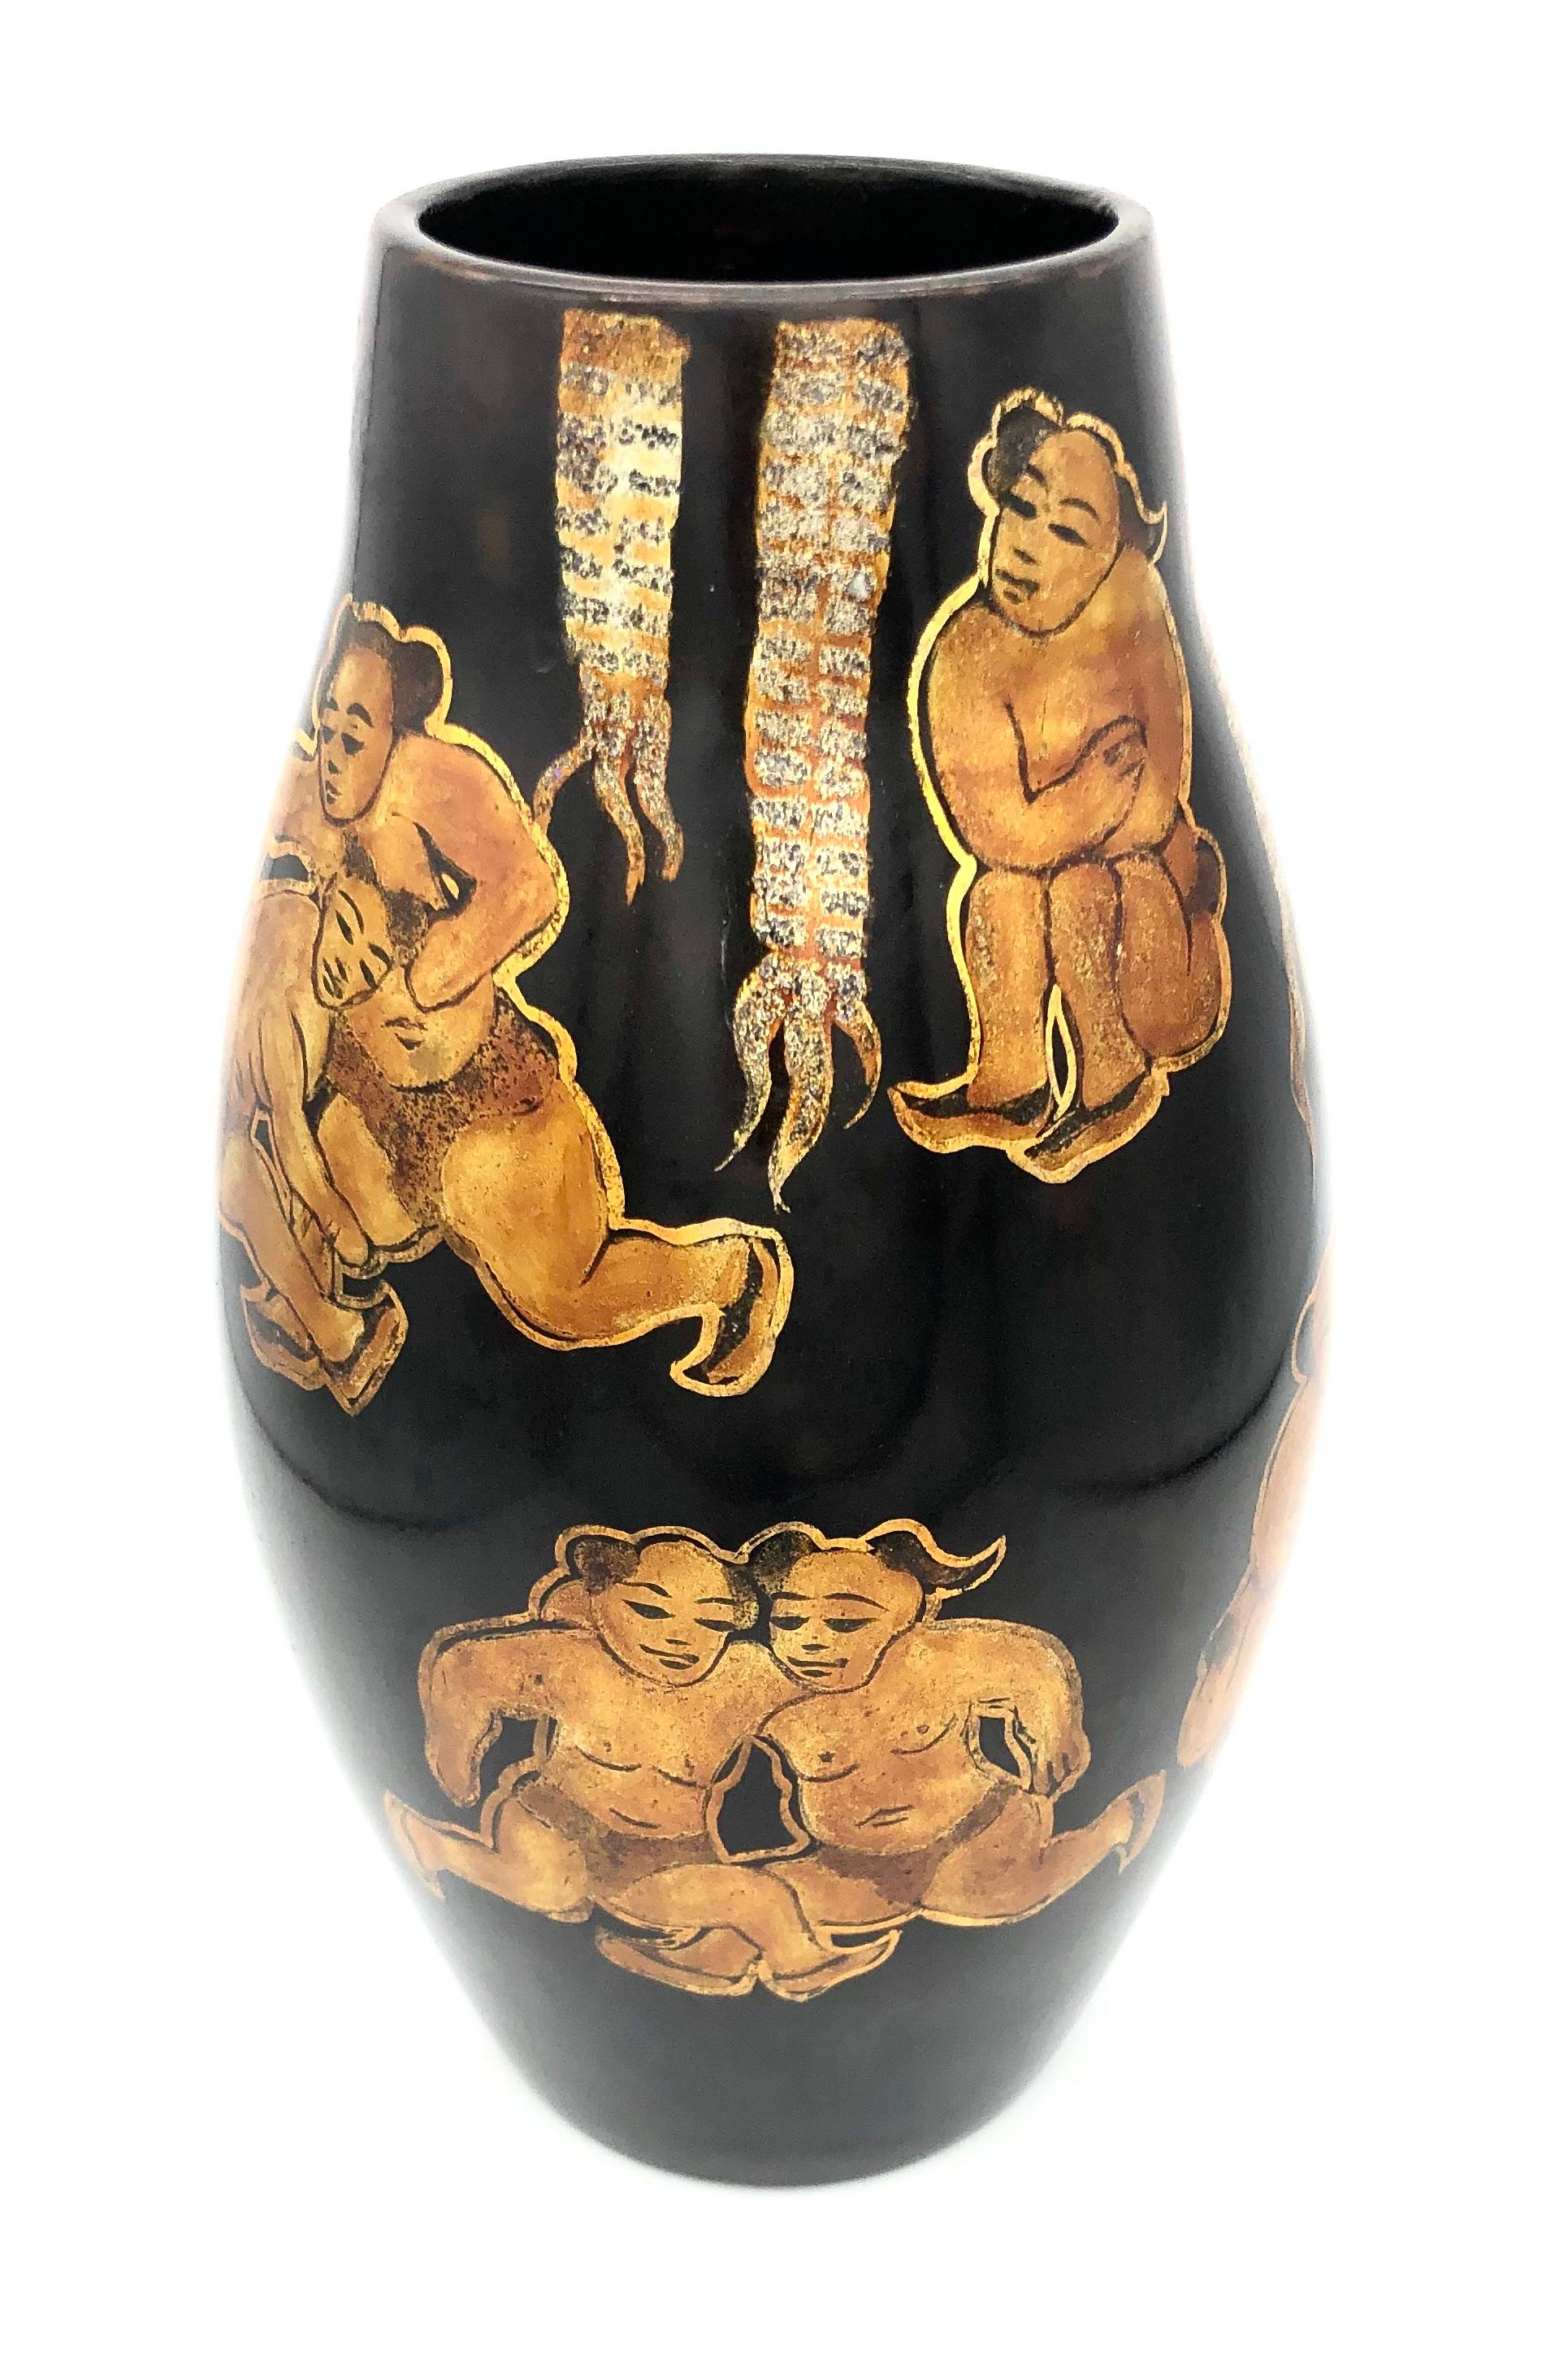 Unusual lacquer vase depicting wrestlers in different poses and a drummer. The figures and banderoles are painted with gold, silver and black color onto the brown/red lacquer.
The vase is signed on the base. 